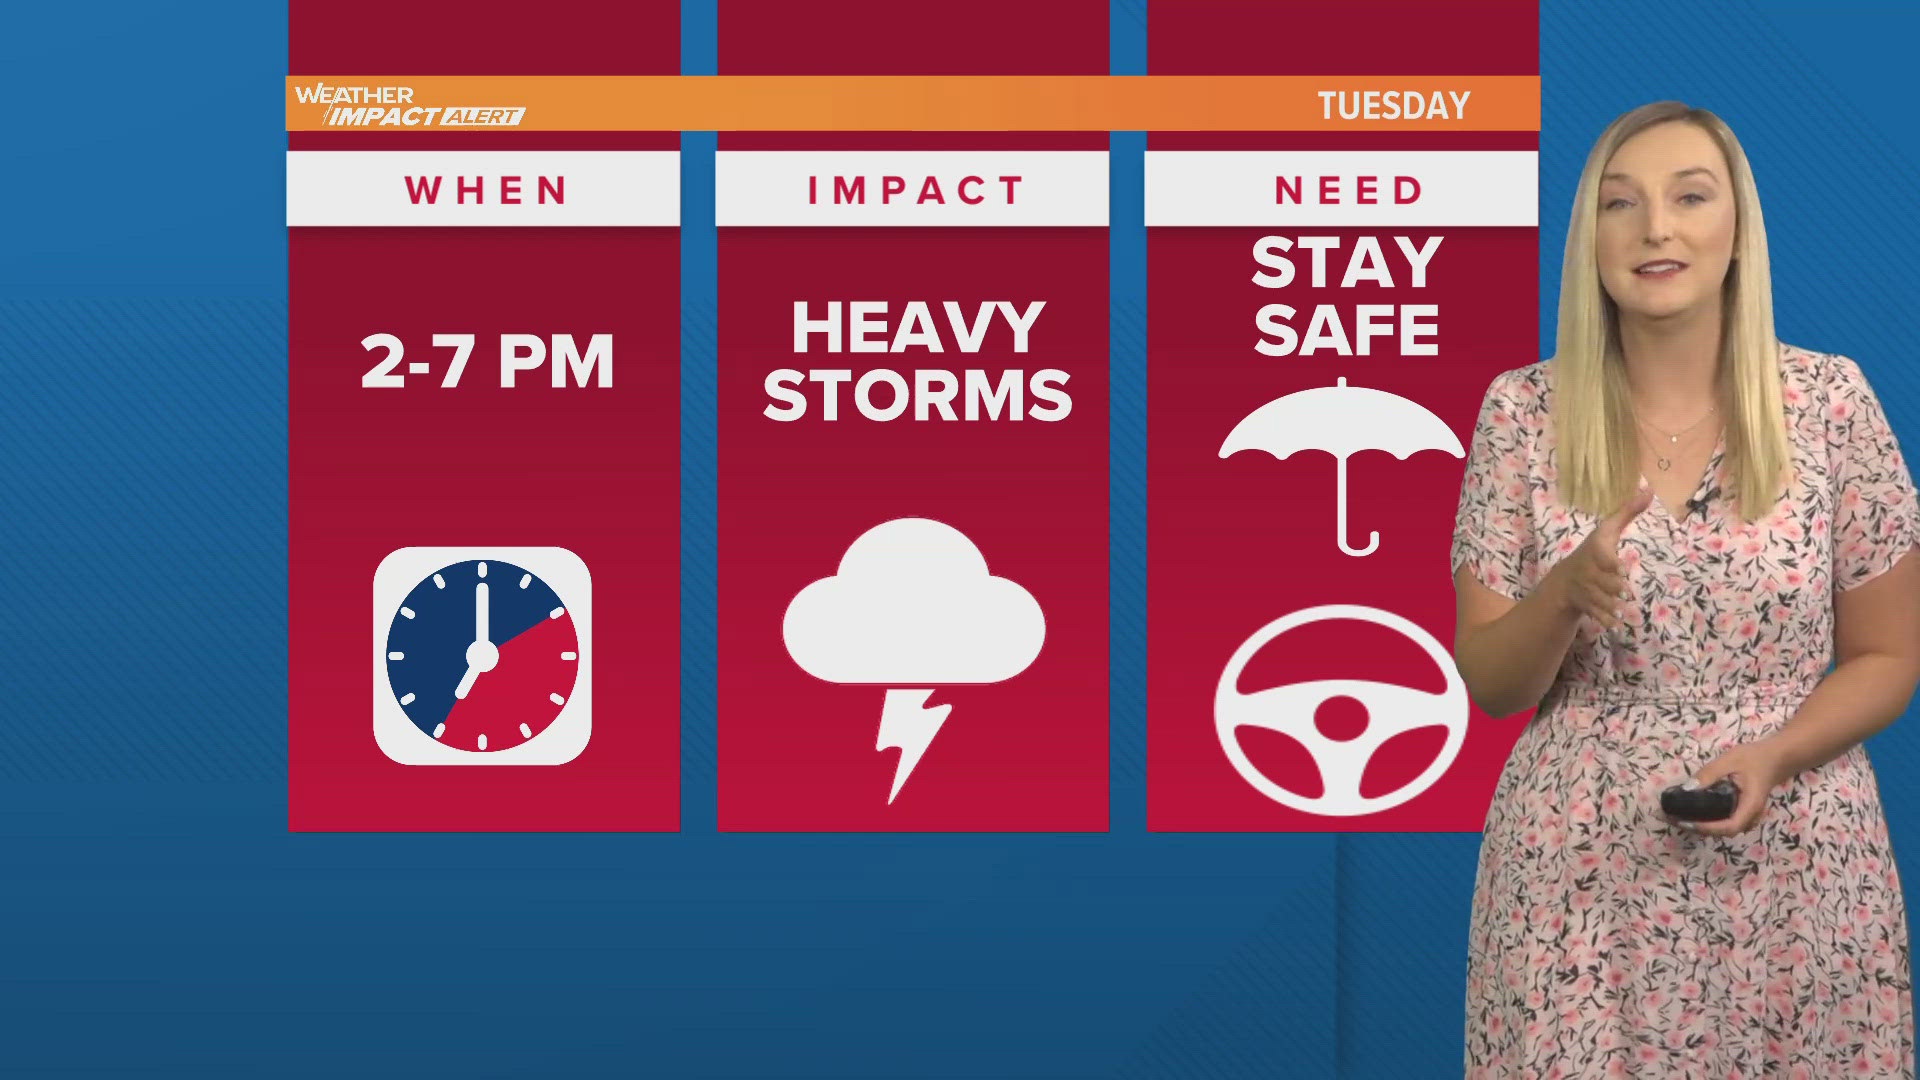 The First Coast's Most Accurate Weather Team has issued an Impact Alert Day for Tuesday.